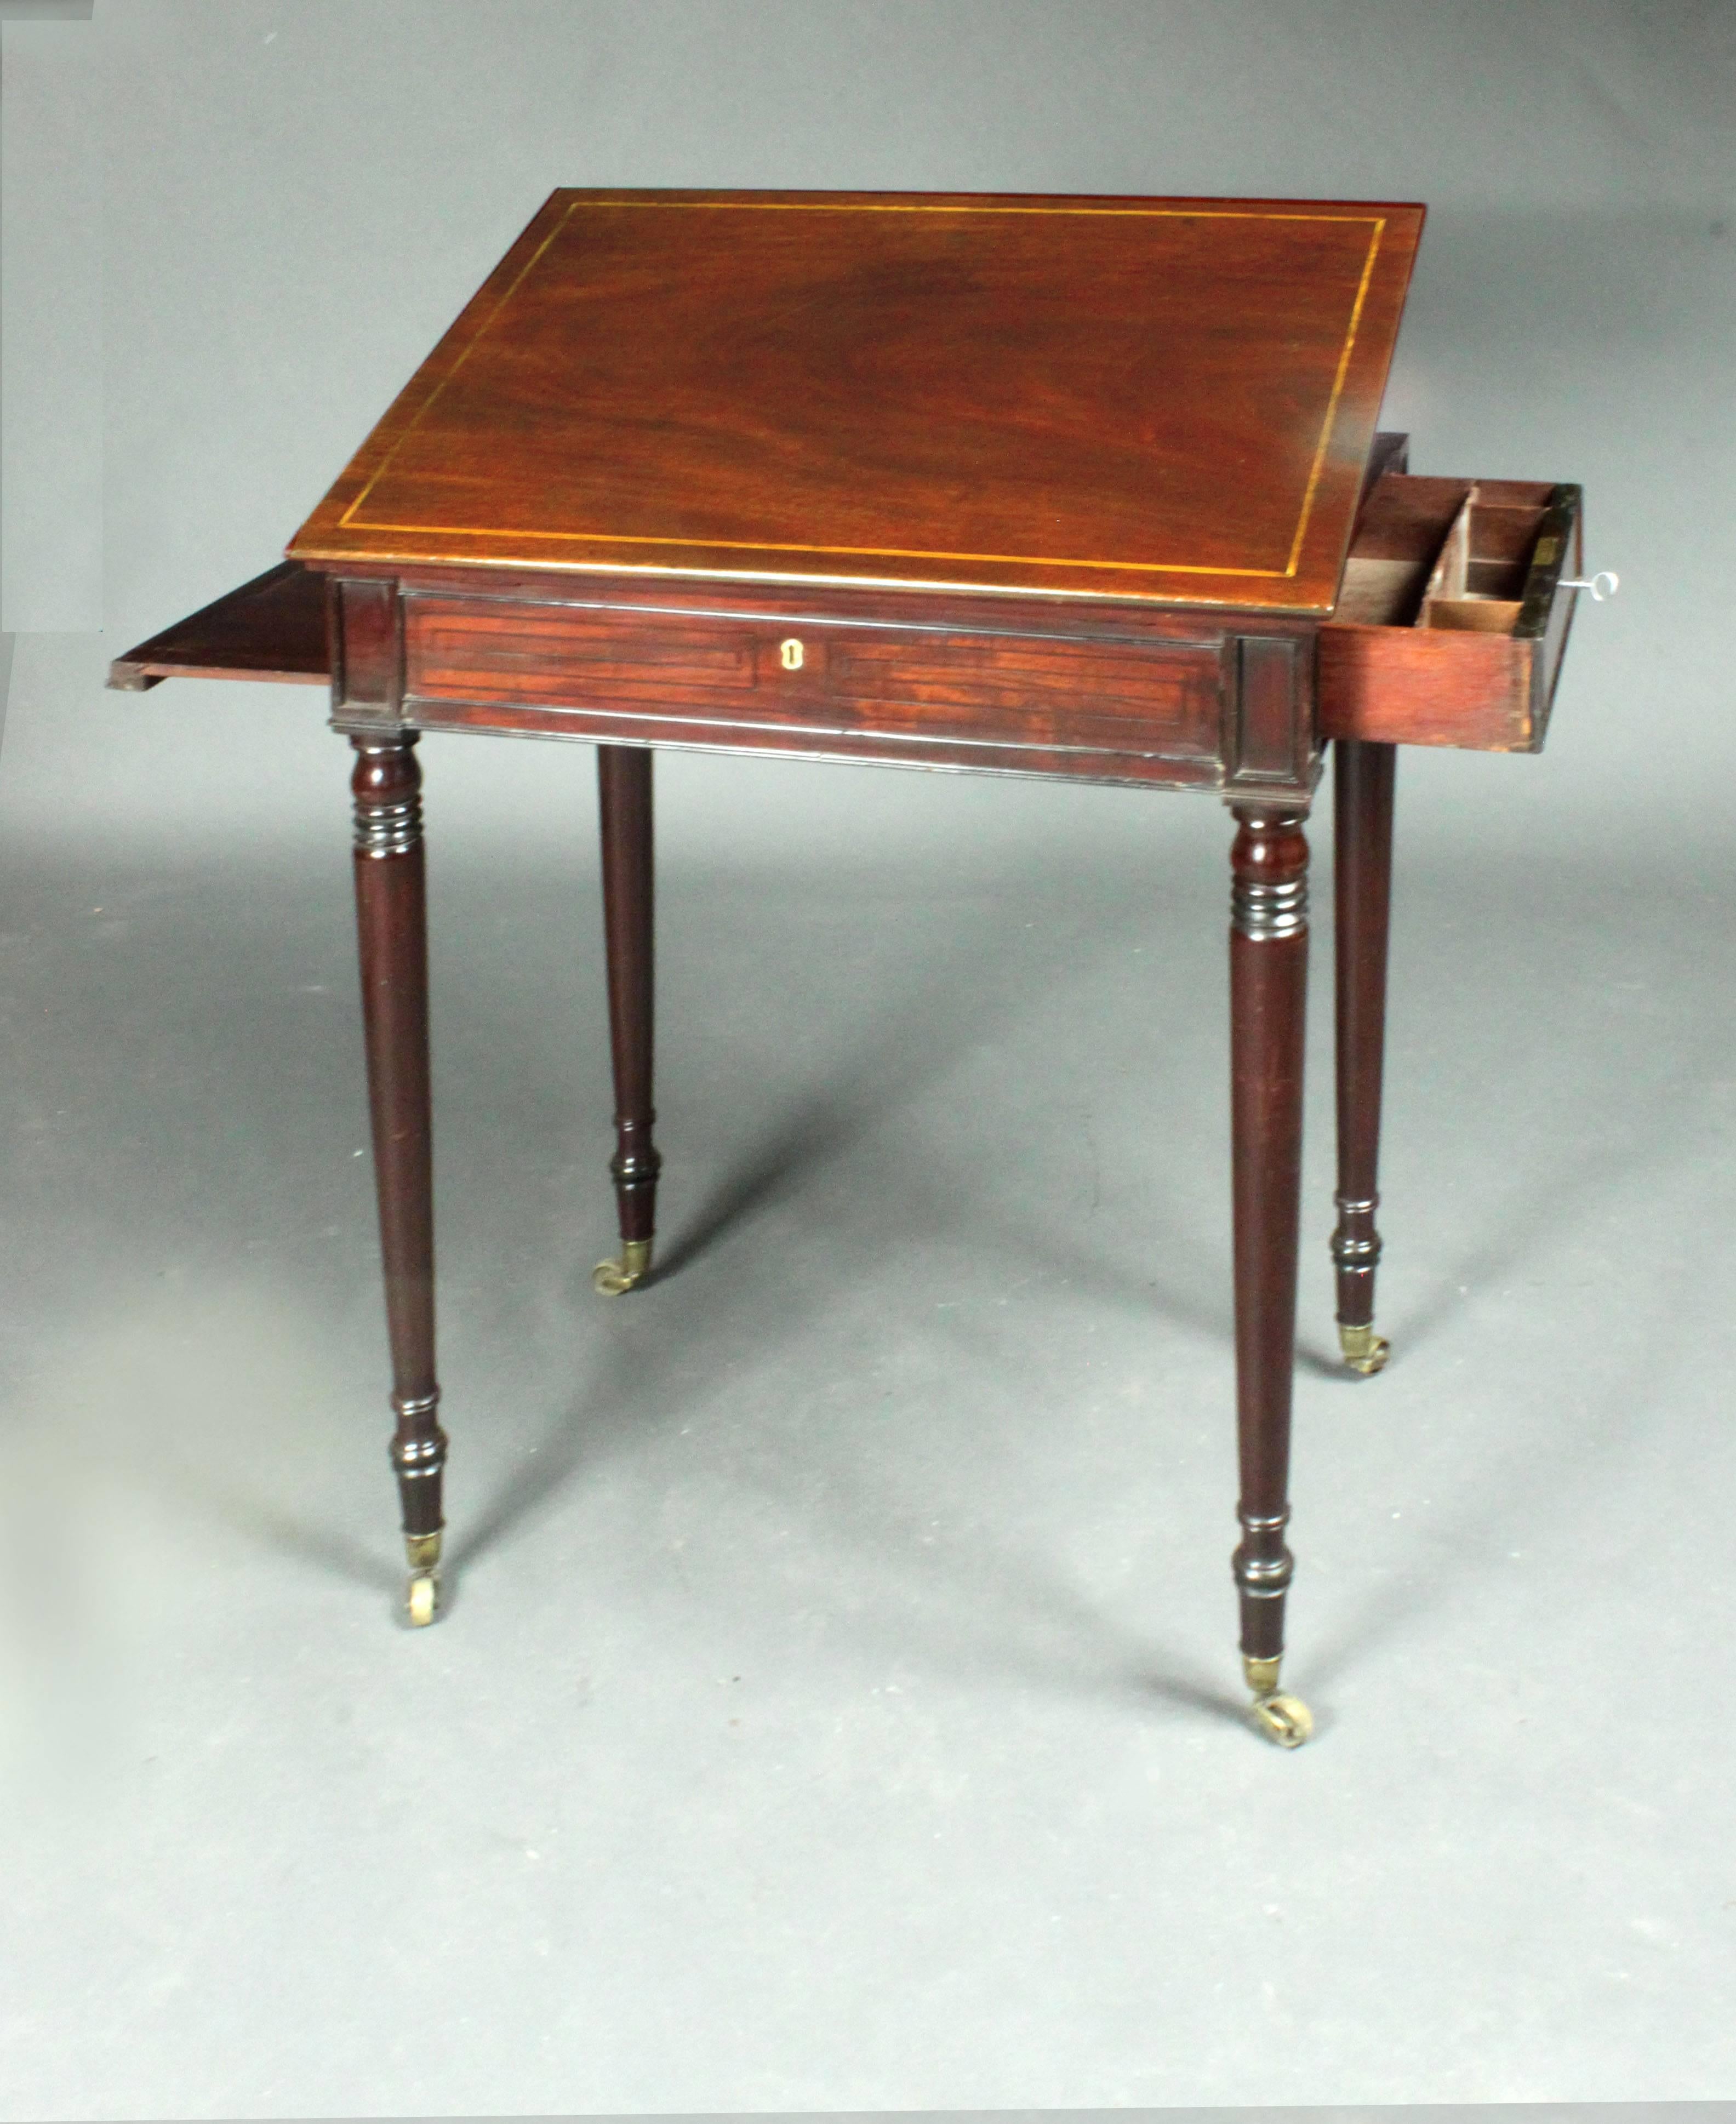 A lovely quality small Regency draftsman's table in mahogany with Greek key ebony inlay; handsomely finished with three false drawers and one real, fitted drawer, the framed top with stay and ratchet; elegant slim turned legs.

  